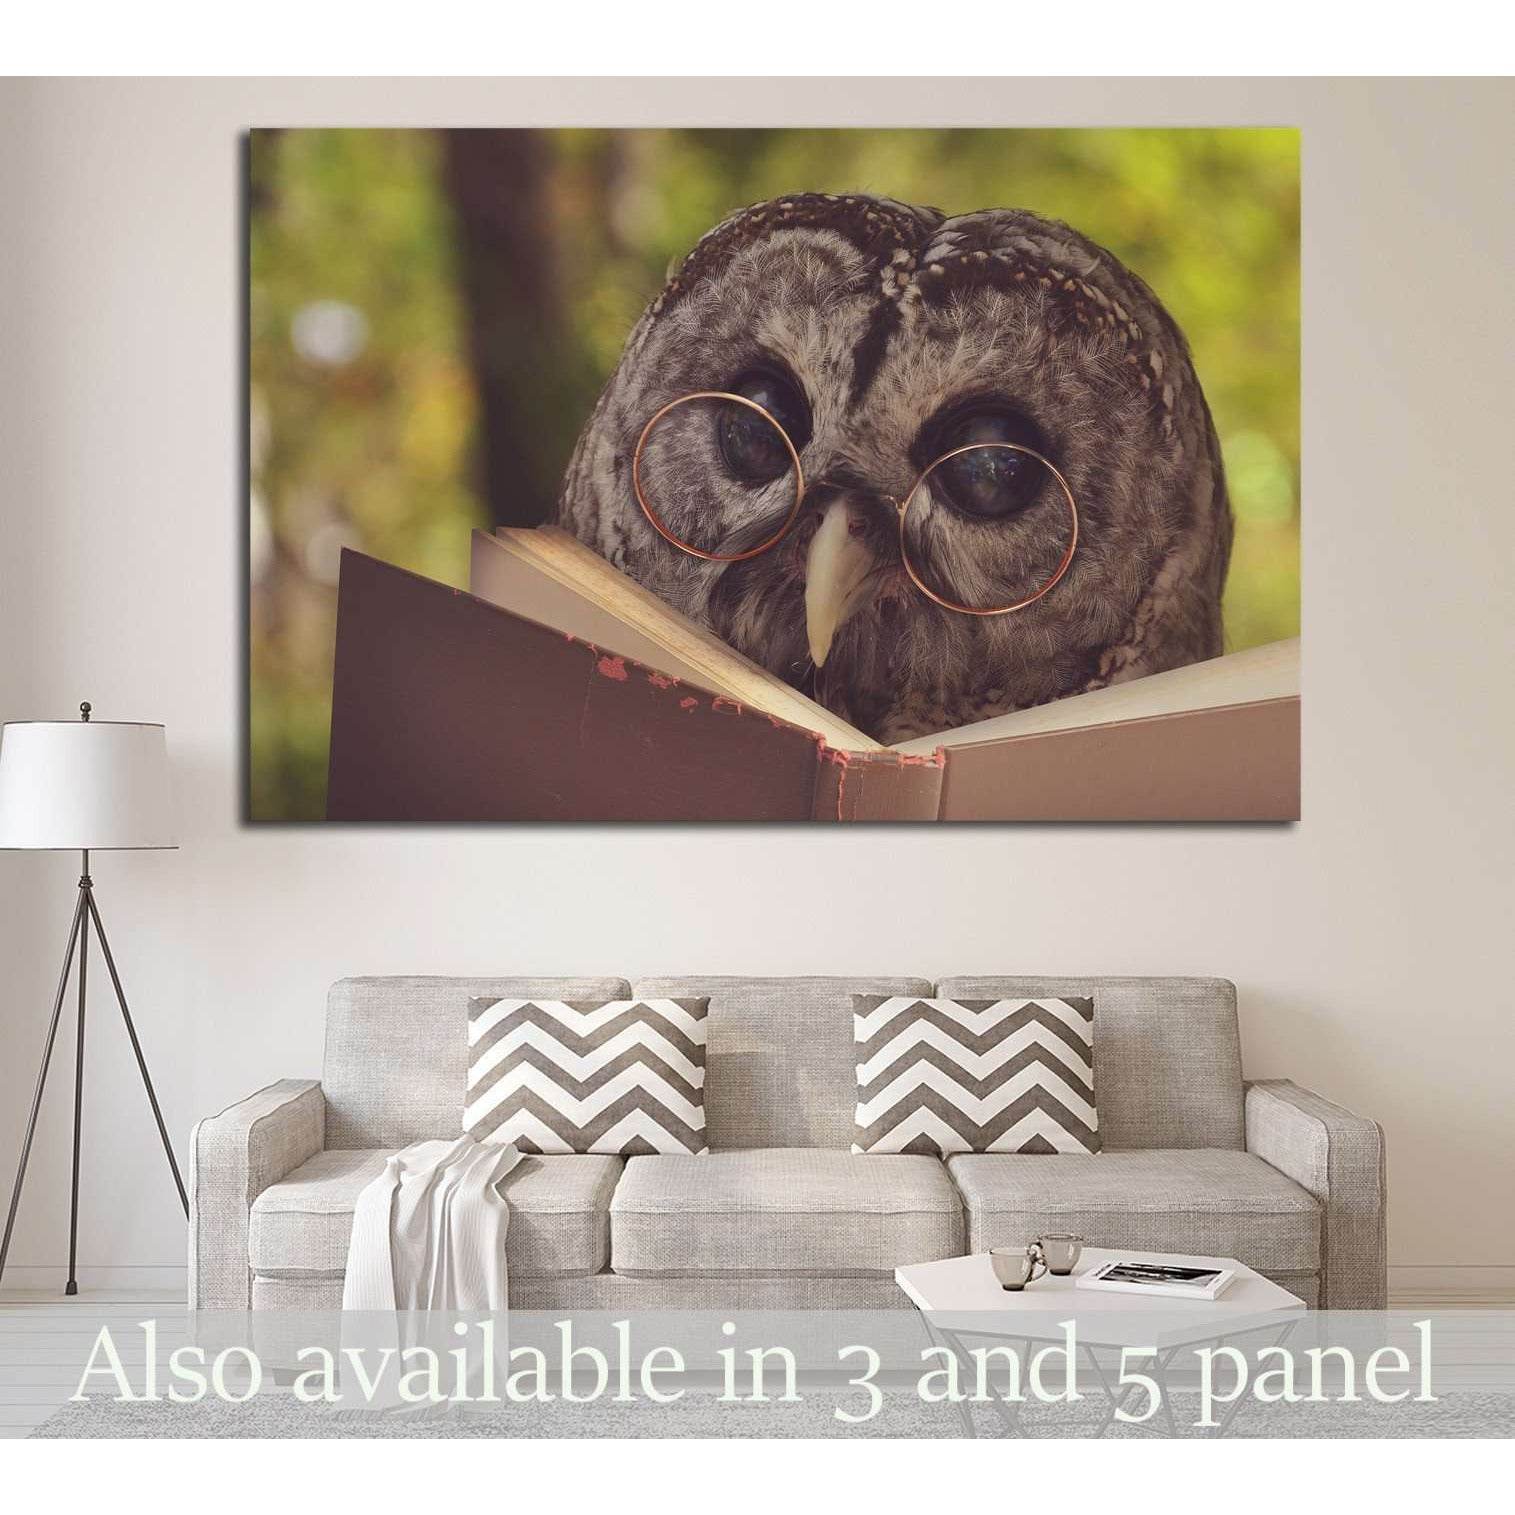 An owl animal with glasses is reading a book in the woods №1849 - canvas print wall art by Zellart